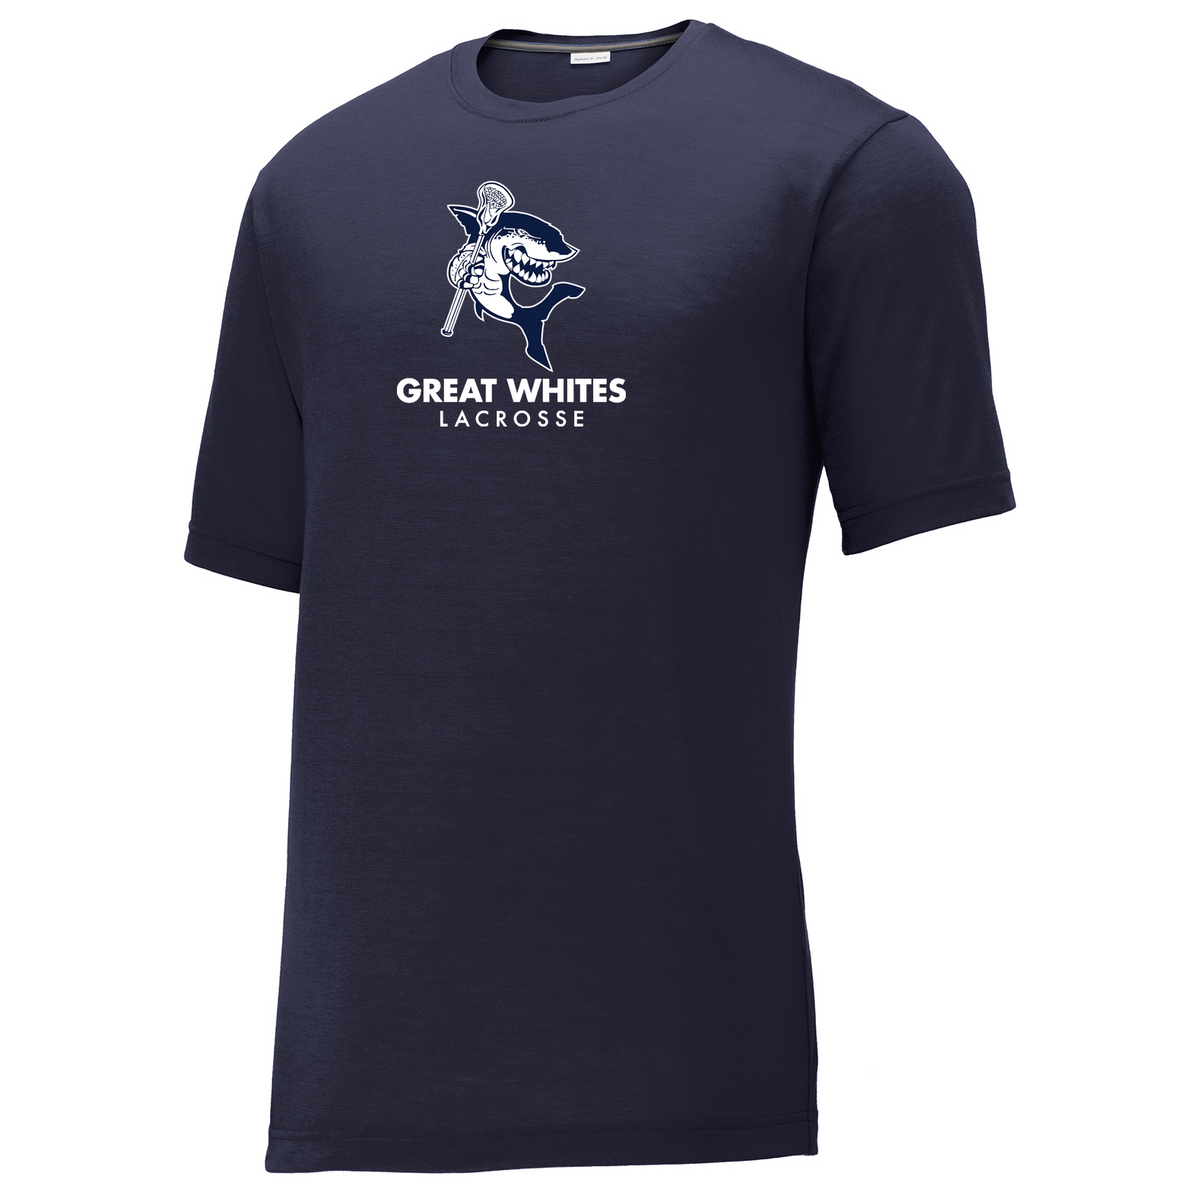 Great Whites Lacrosse CottonTouch Performance T-Shirt